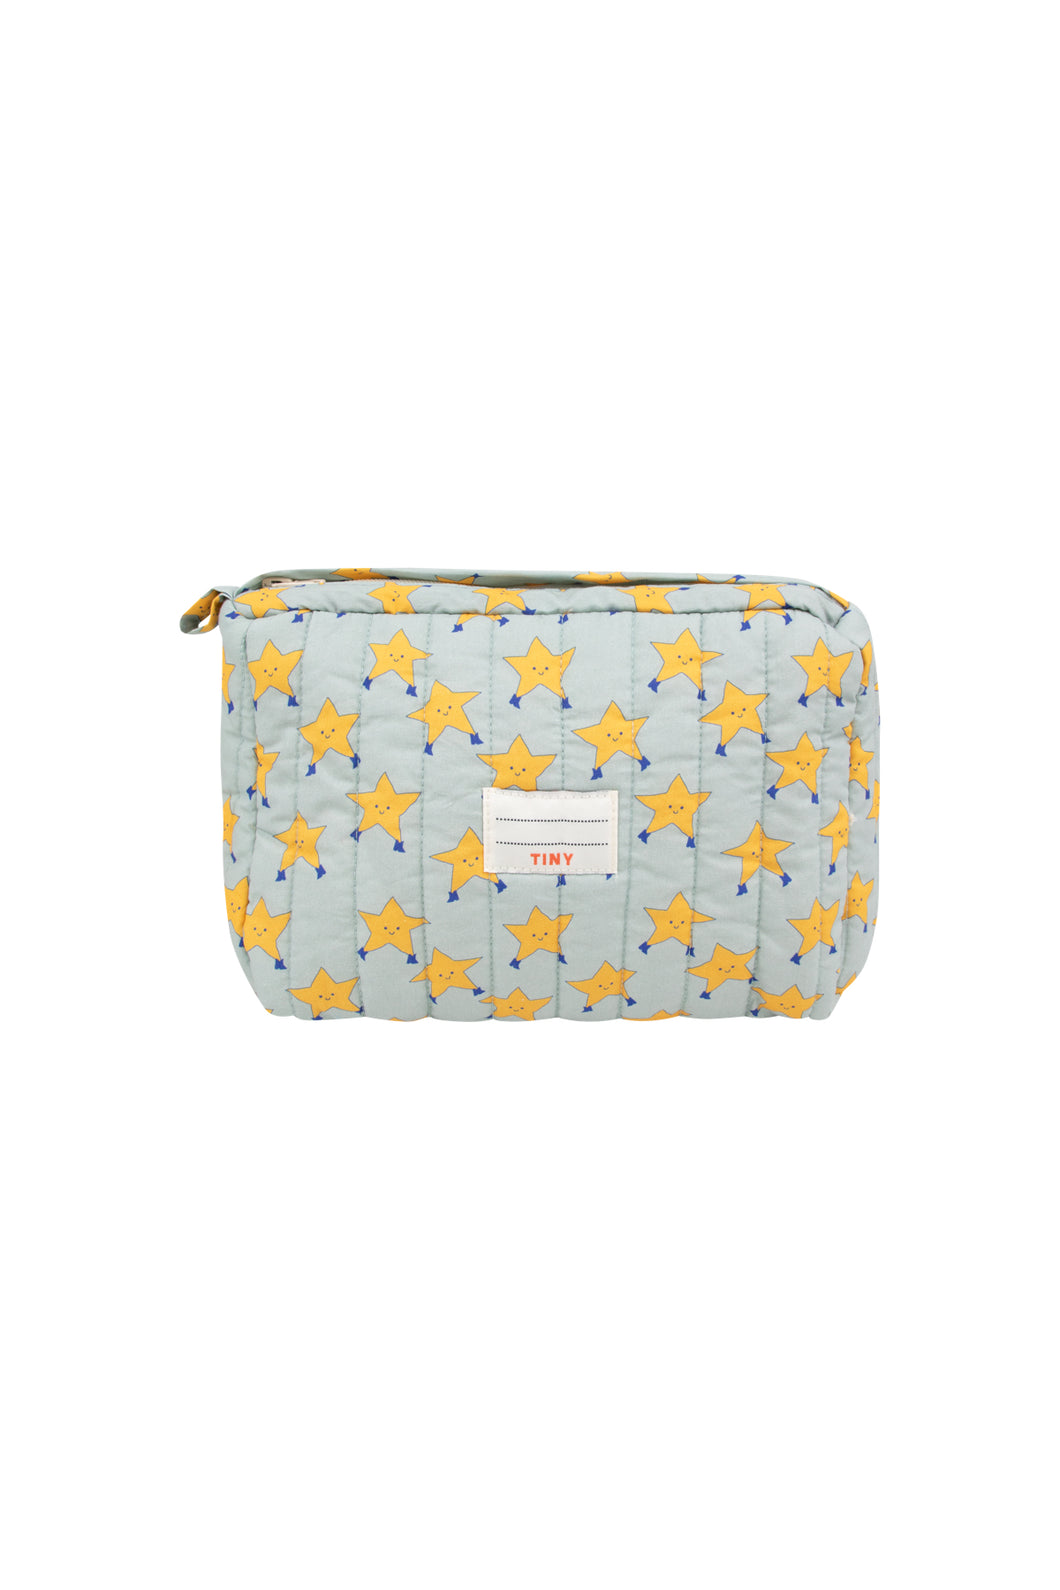 Dancing Stars Large Pouch